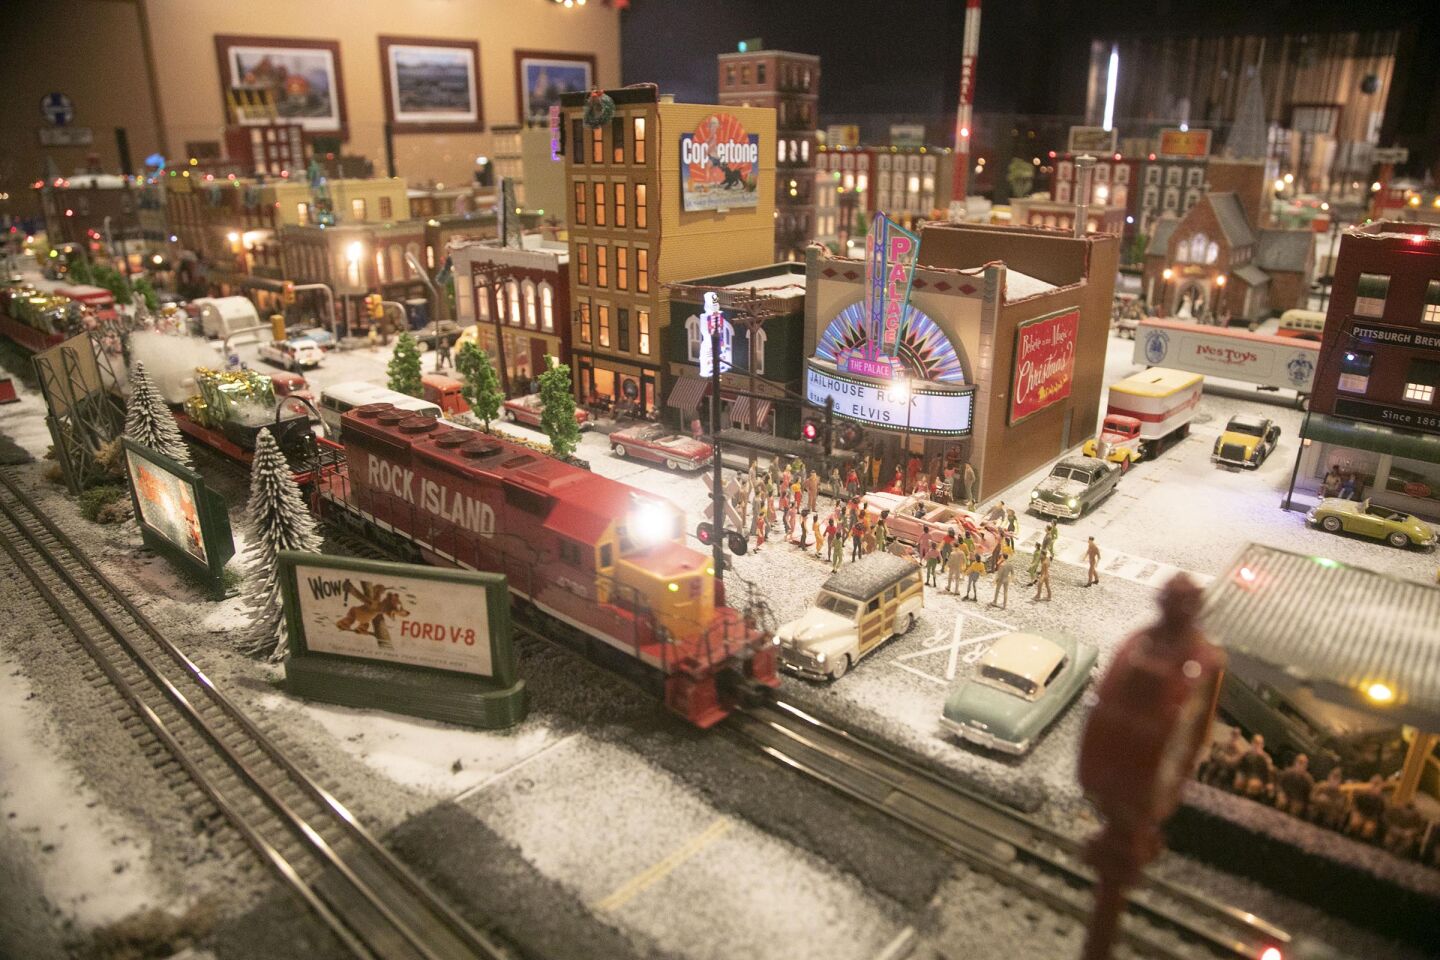 David Lizerbram and his wife Mana Monzavi took over the Old Town Model Railroad Depot, which was in danger of closing. The extensive train layout and its detailed and sometimes humorous dioramas was photographed on Friday, Dec. 13, 2019, at its Old Town, San Diego location. Train going by the Palace Theater with Elvis in his pink Cadillac.